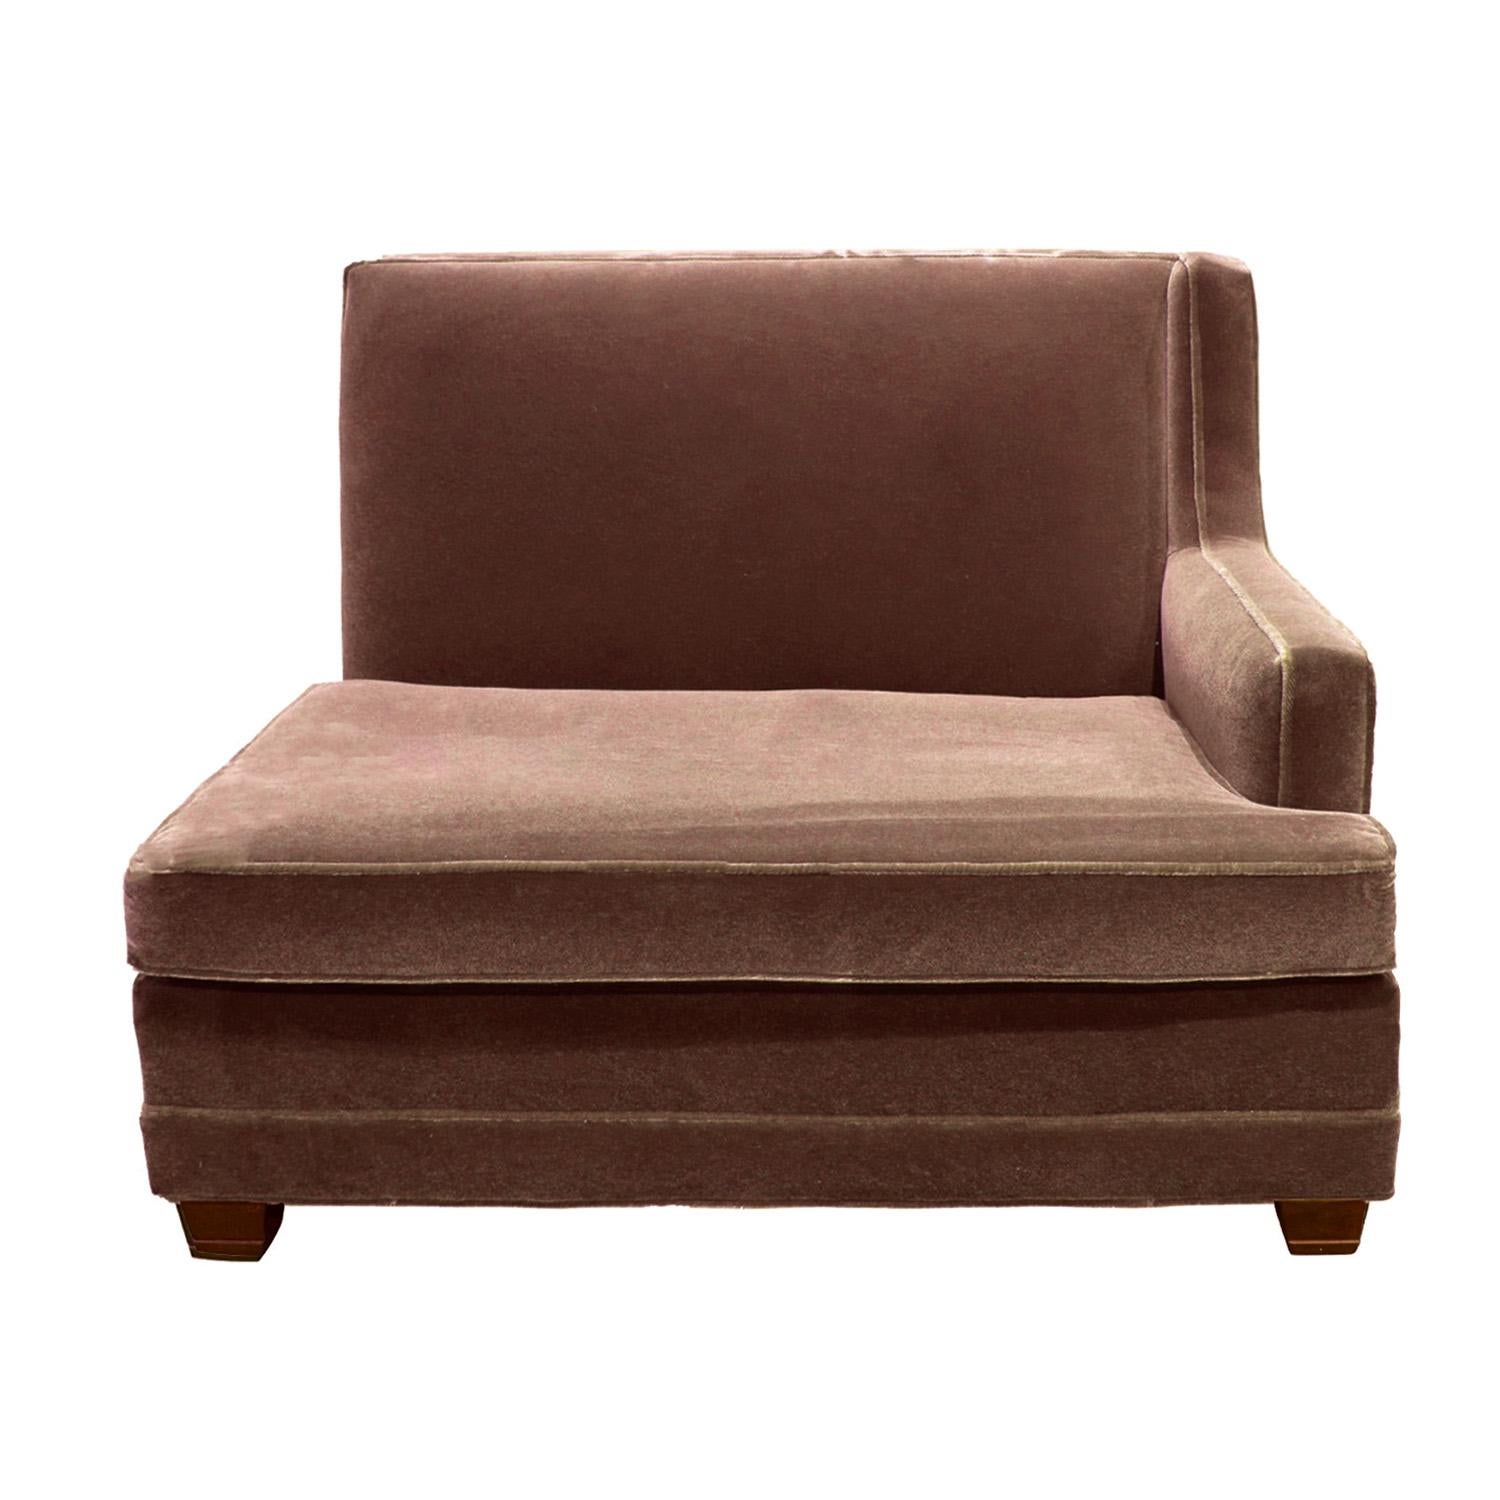 Hand-Crafted Elegant 4-Piece Modular Sofa in Mohair with Mahogany Legs 1940s For Sale